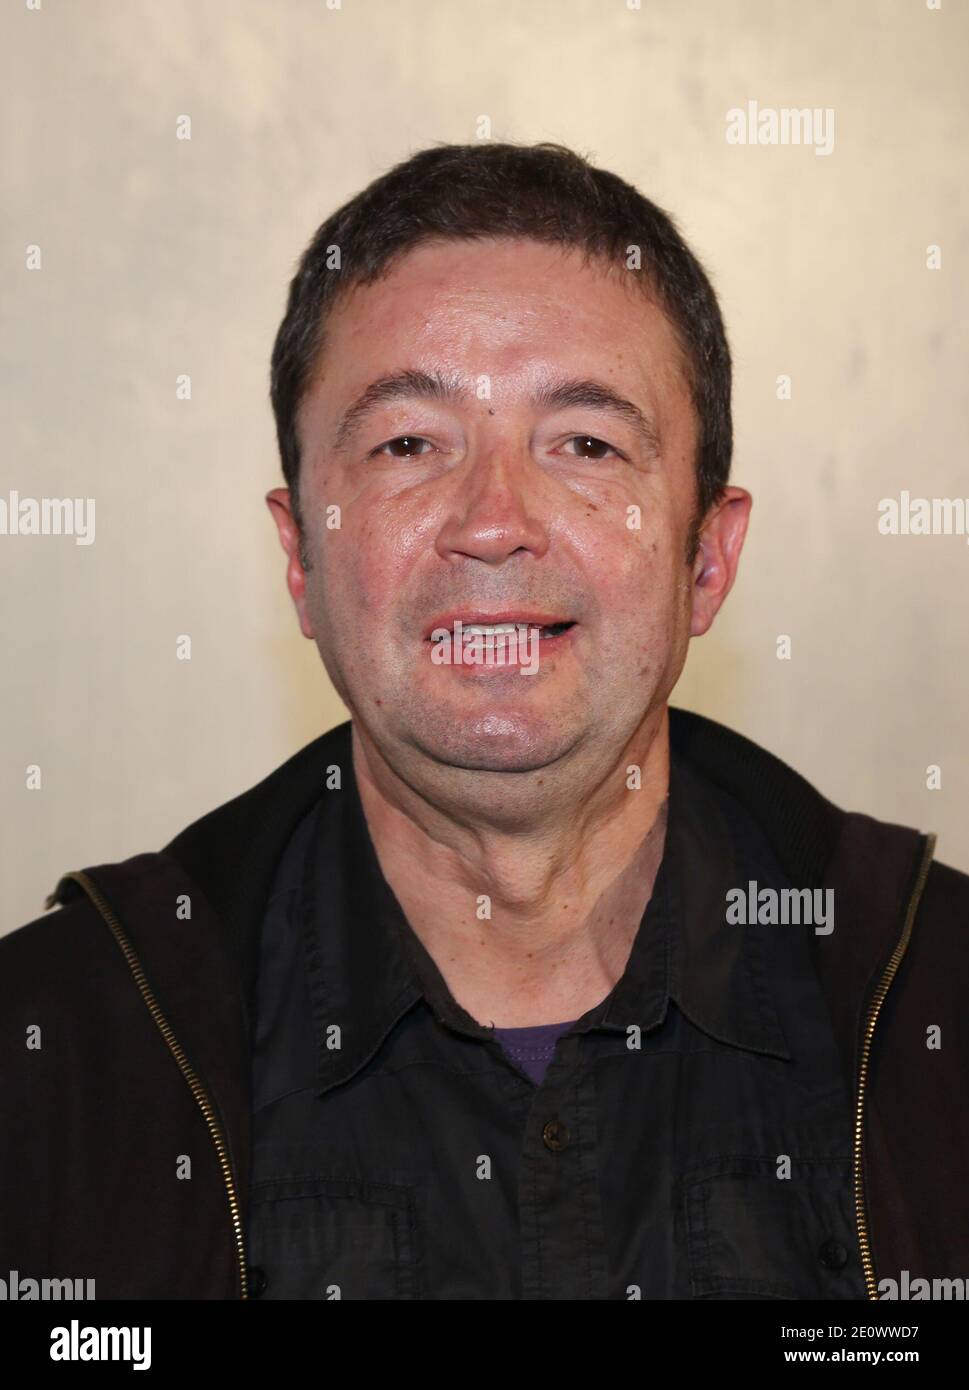 Frederic Bouraly attending the 19th Prix du Producteur Francais de Television (French TV Producer Awards) held at Pavillon Cambon in Paris, France on December 10,2012. Photo by Denis Guignebourg/ABACAPRESS.COM Stock Photo